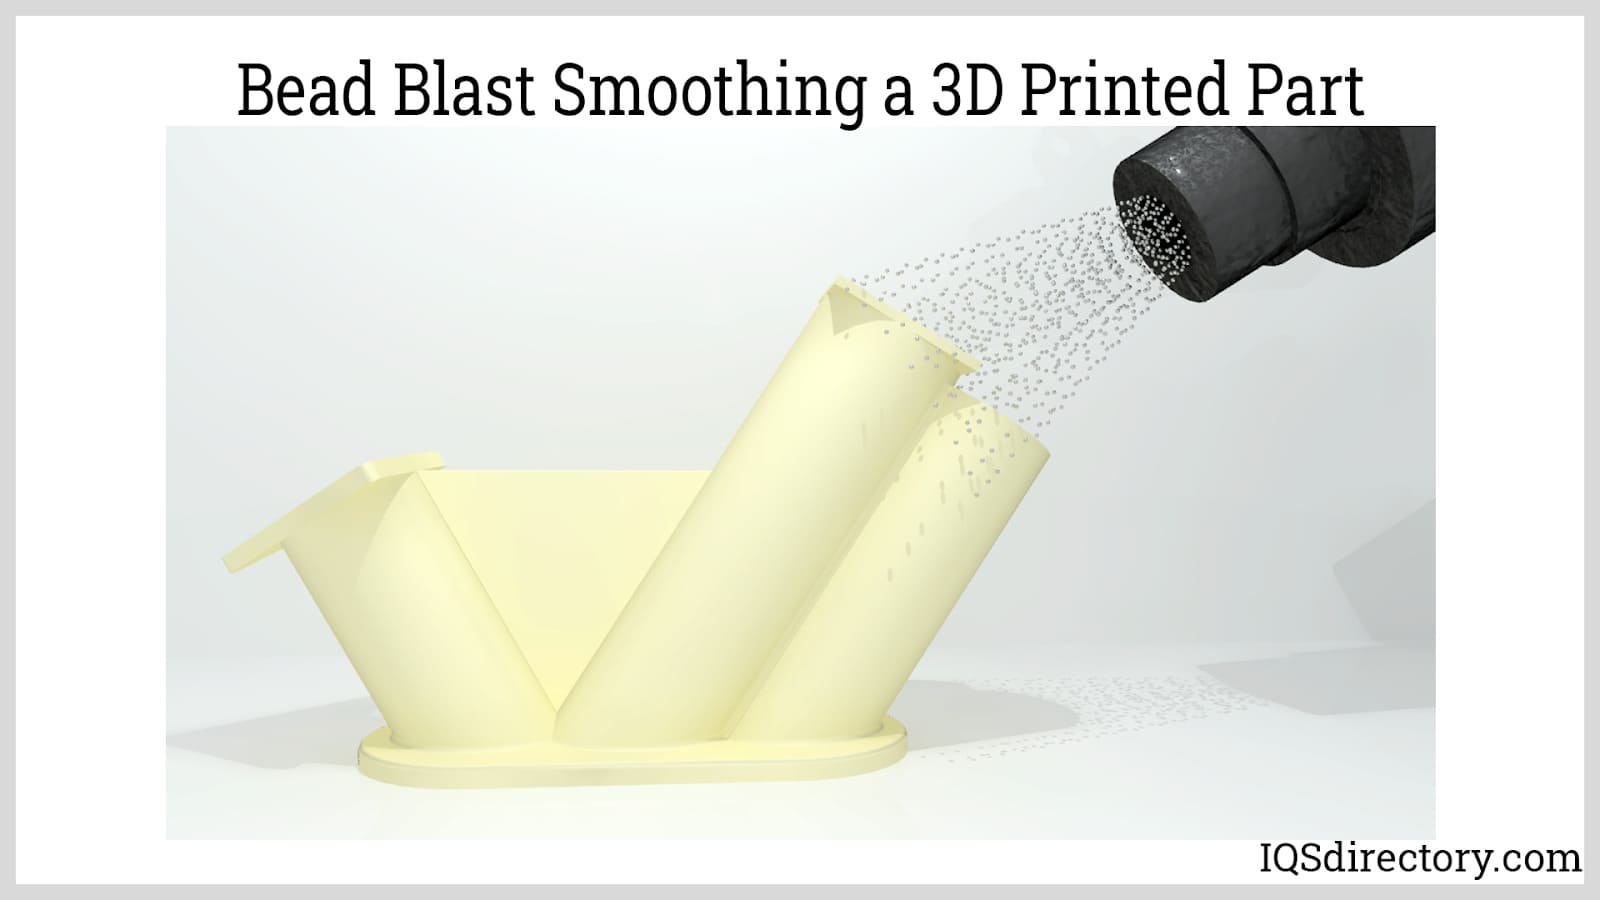 Bead Blast Smoothing a 3D Printed Part